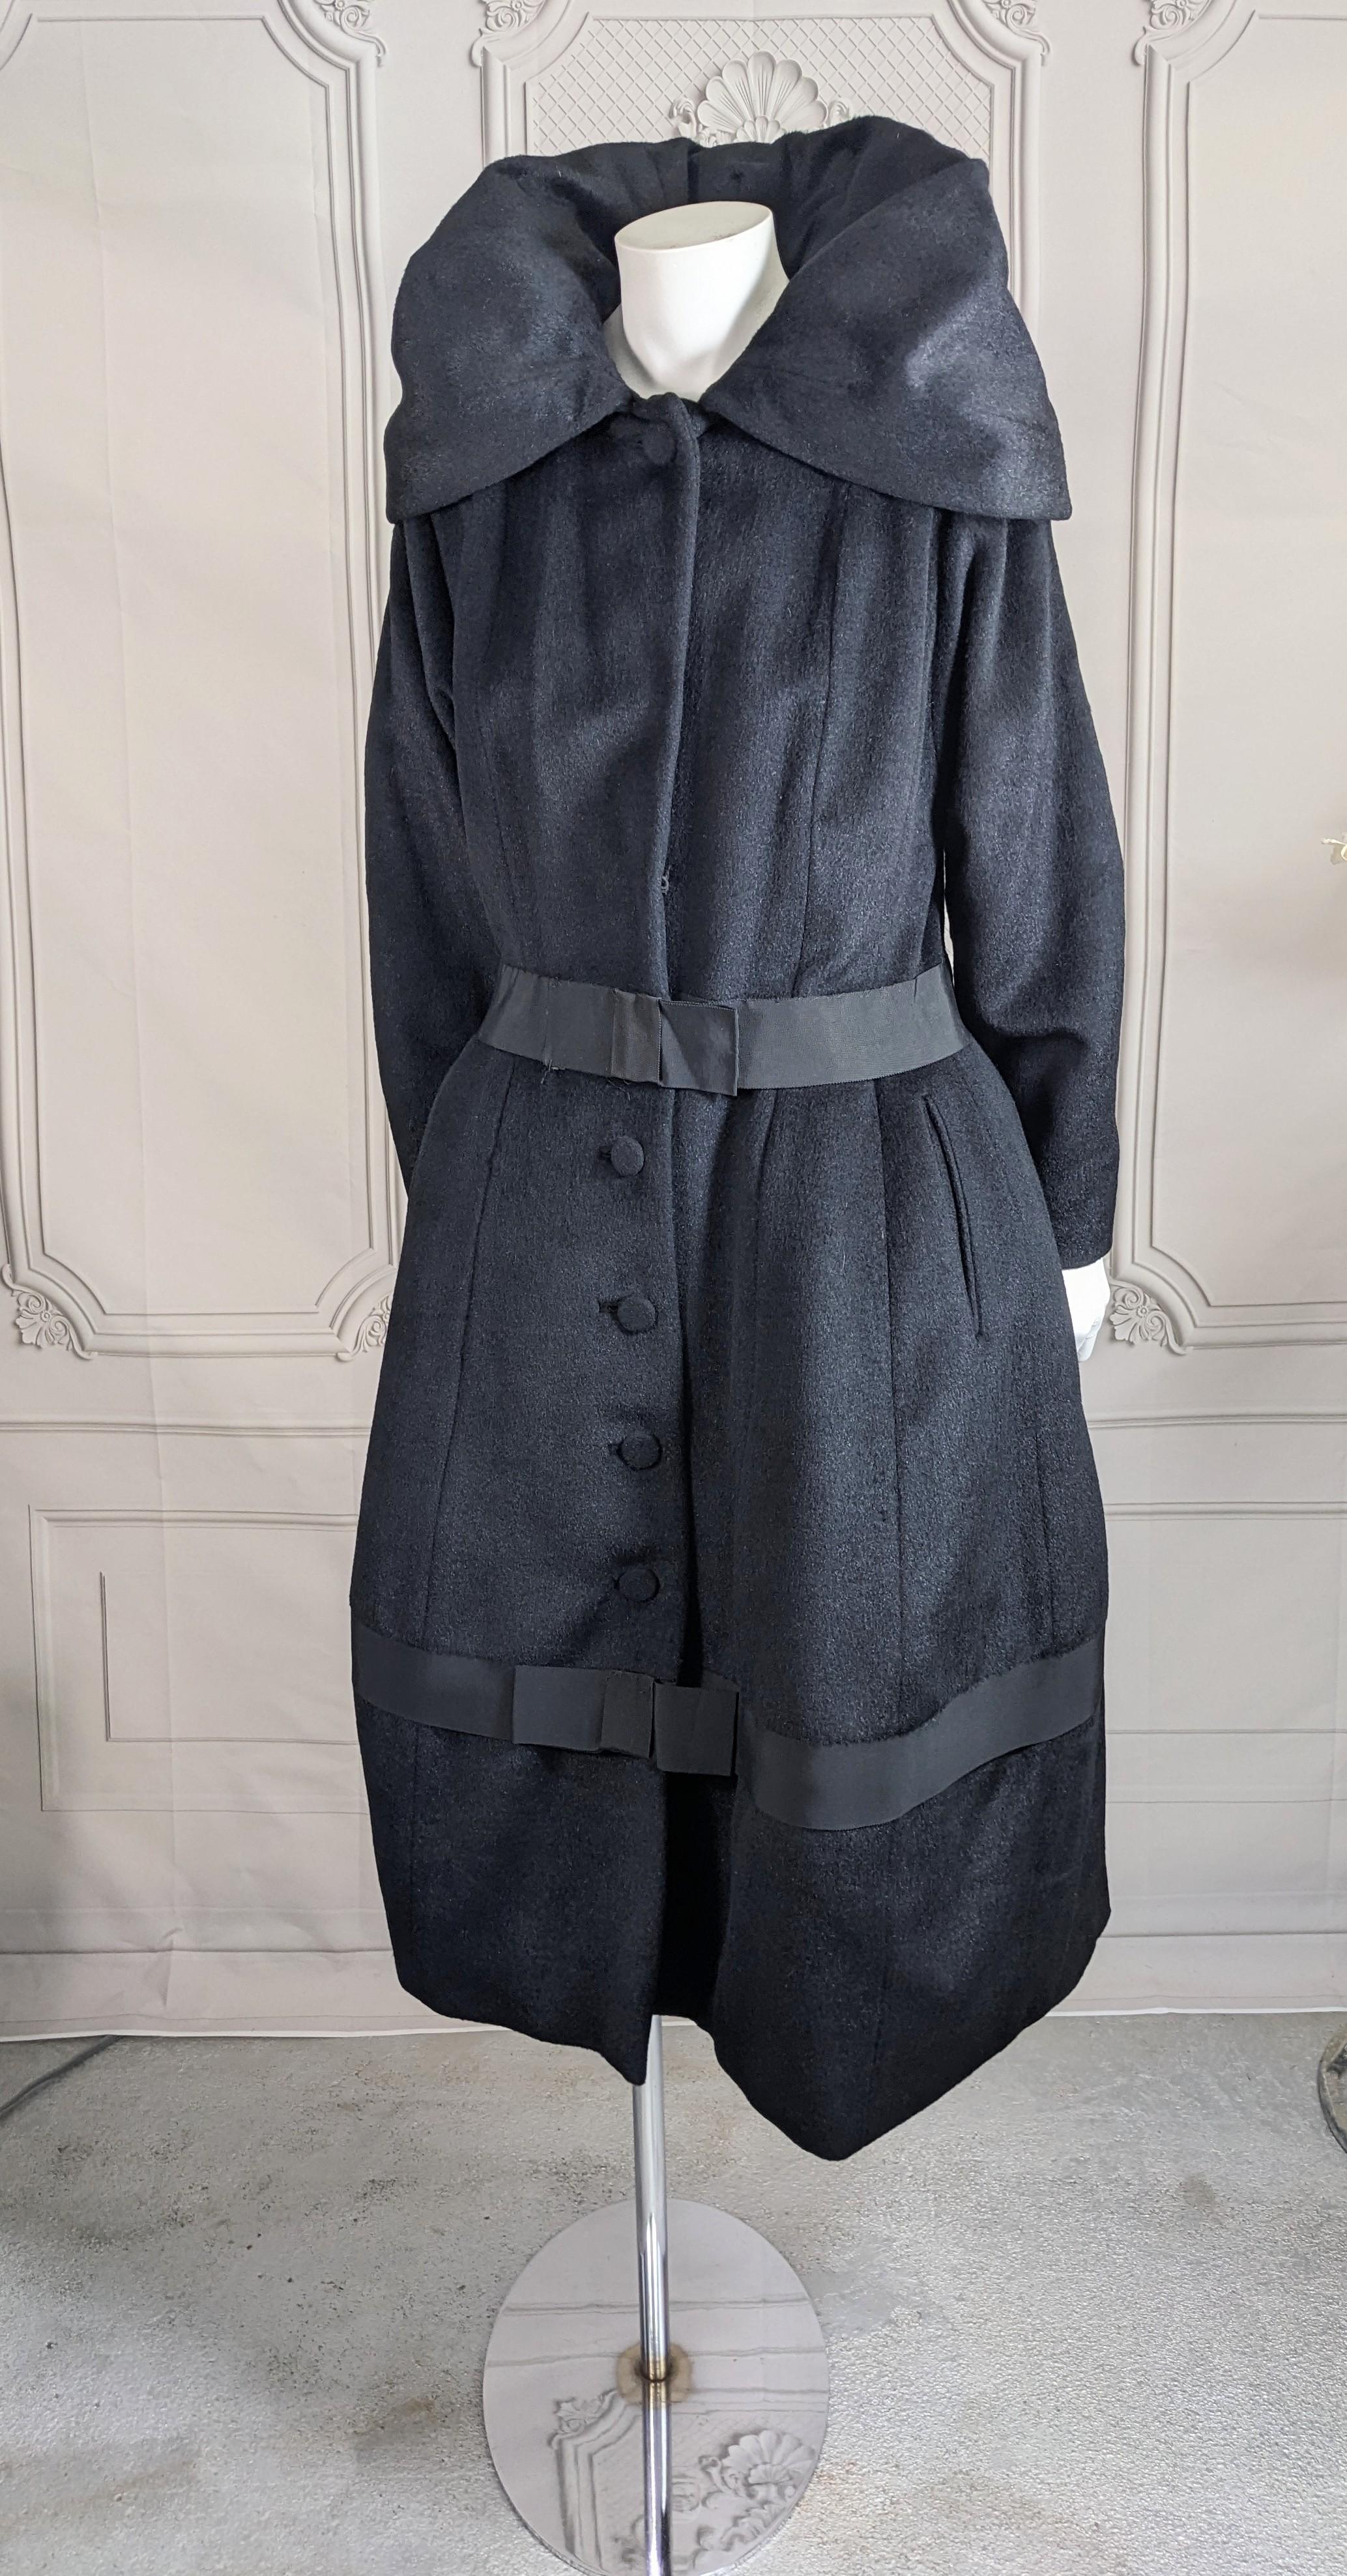 Amazing Lilli Ann Edwardian Inspired Lantern Coat in inky black sealskin like wool. Designed to be worn closed with high tufted collar and lantern shaped skirt for for maximum impact. Soft sleek wool with grosgrain trim at waist and on bubble skirt